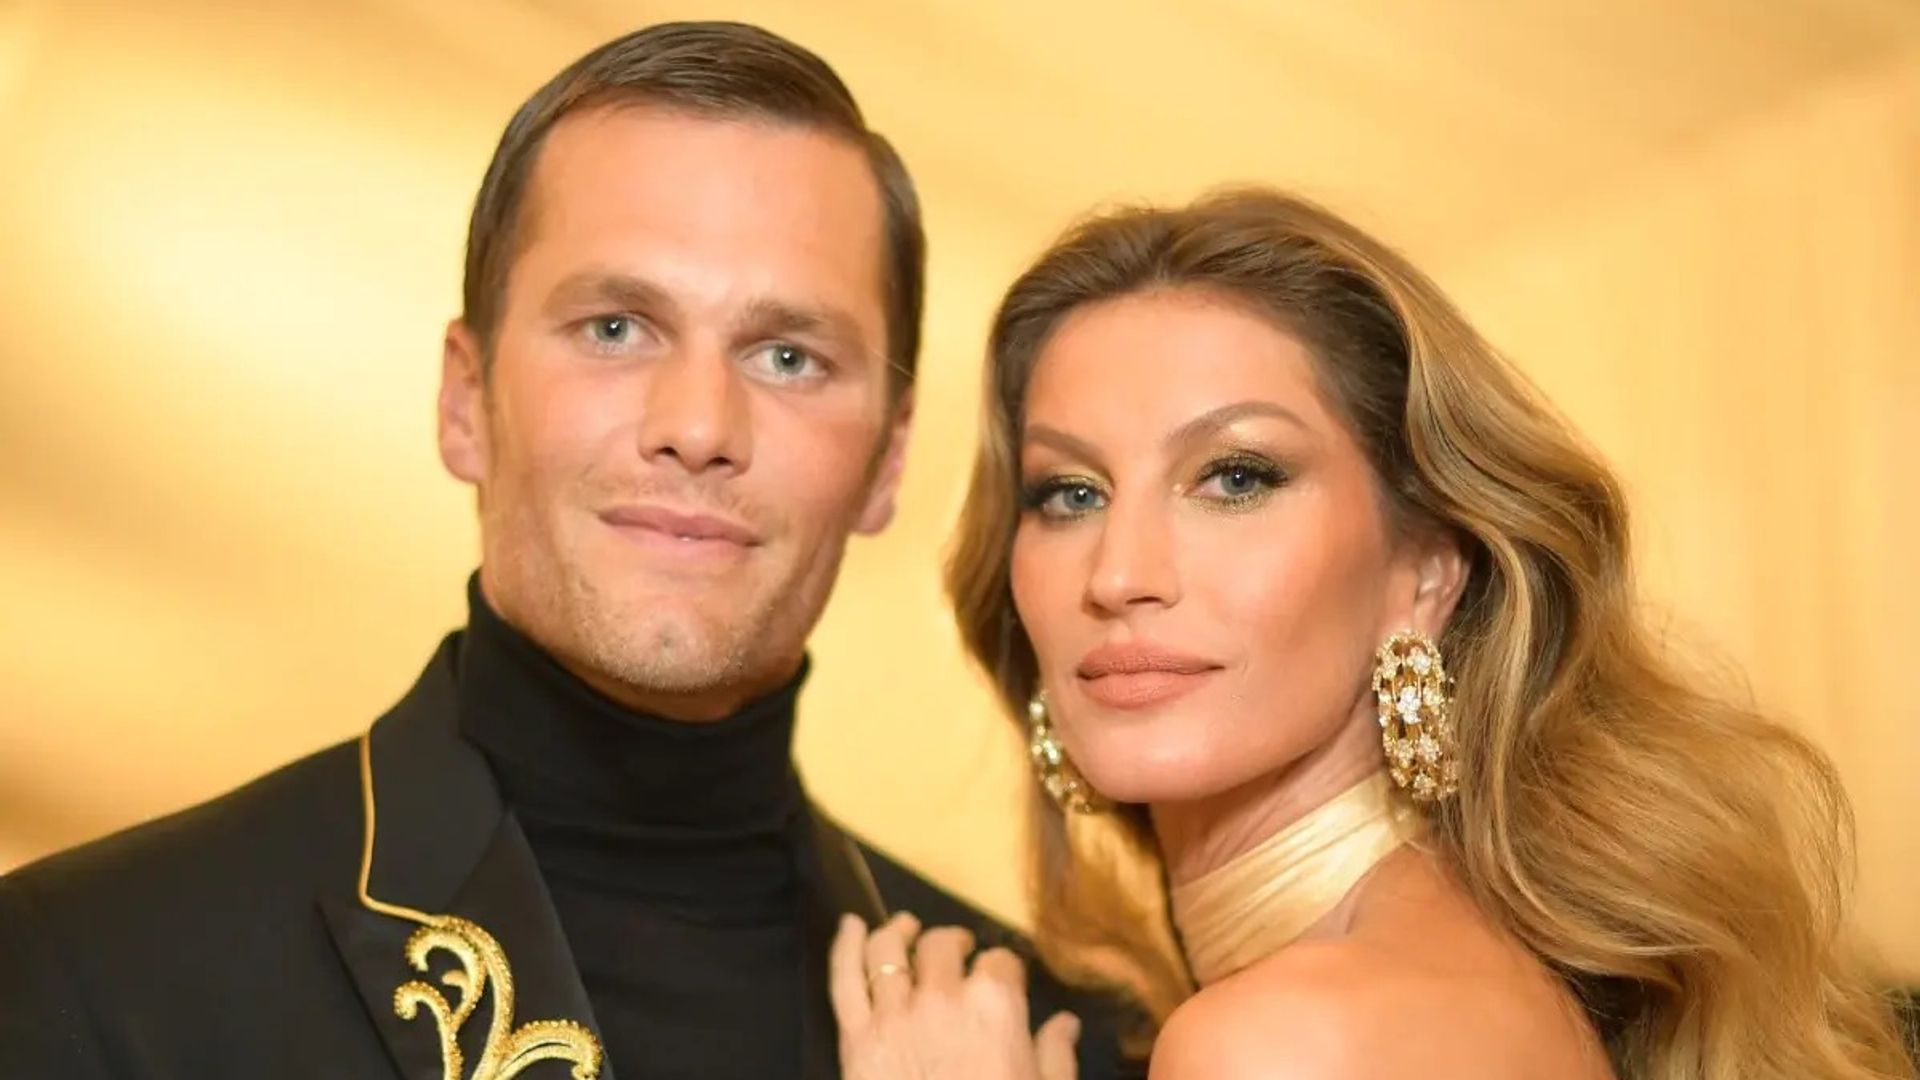 Tom Brady reacts to his wife Gisele and daughter twinning in adorable snap